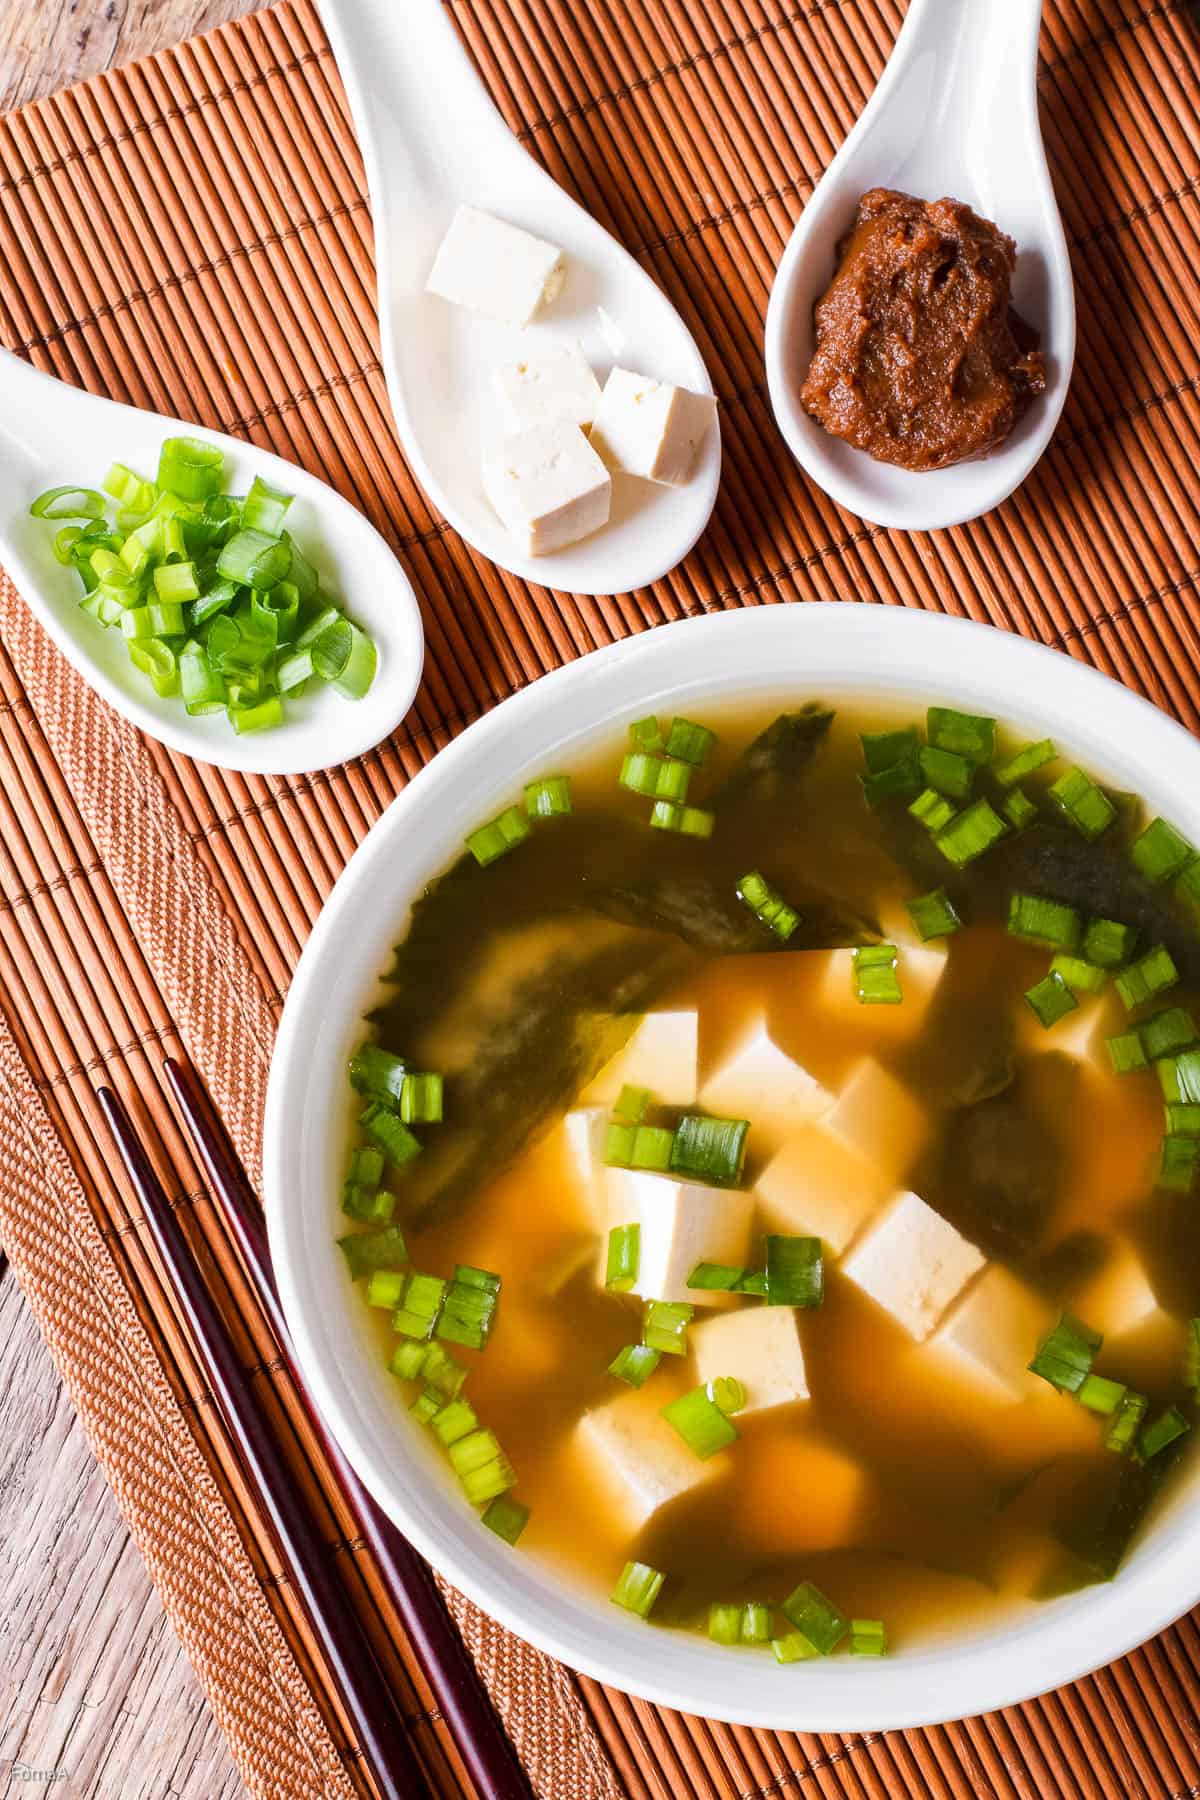 Overhead shot of a bowl of miso soup. There are 3 Asian style soup spoons on the side filled with green onions, tofu cubes, and miso paste.